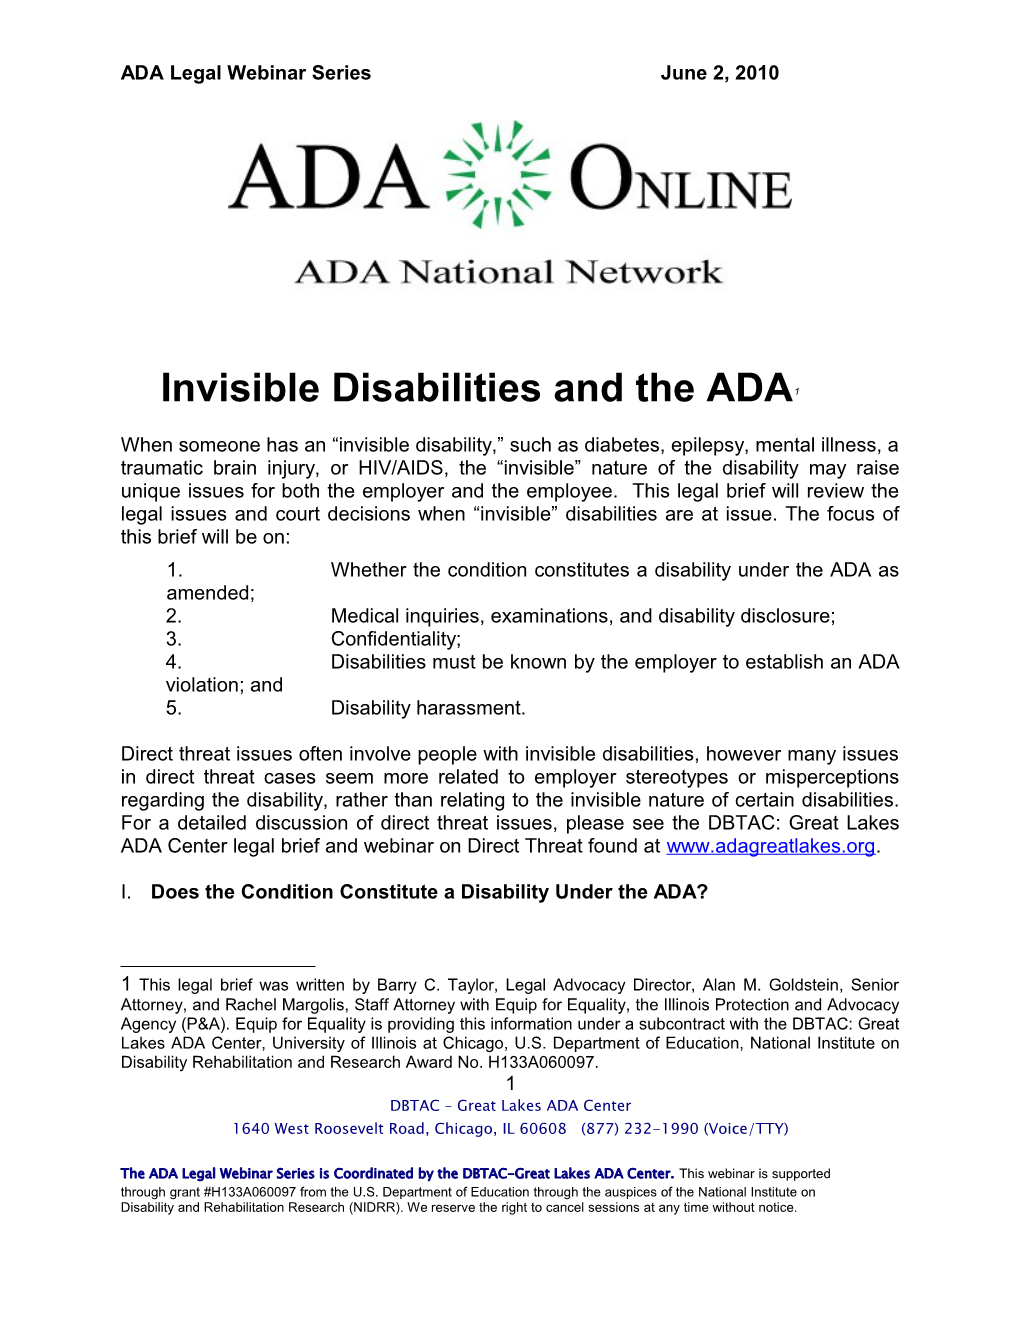 What Is an Invisible Disability